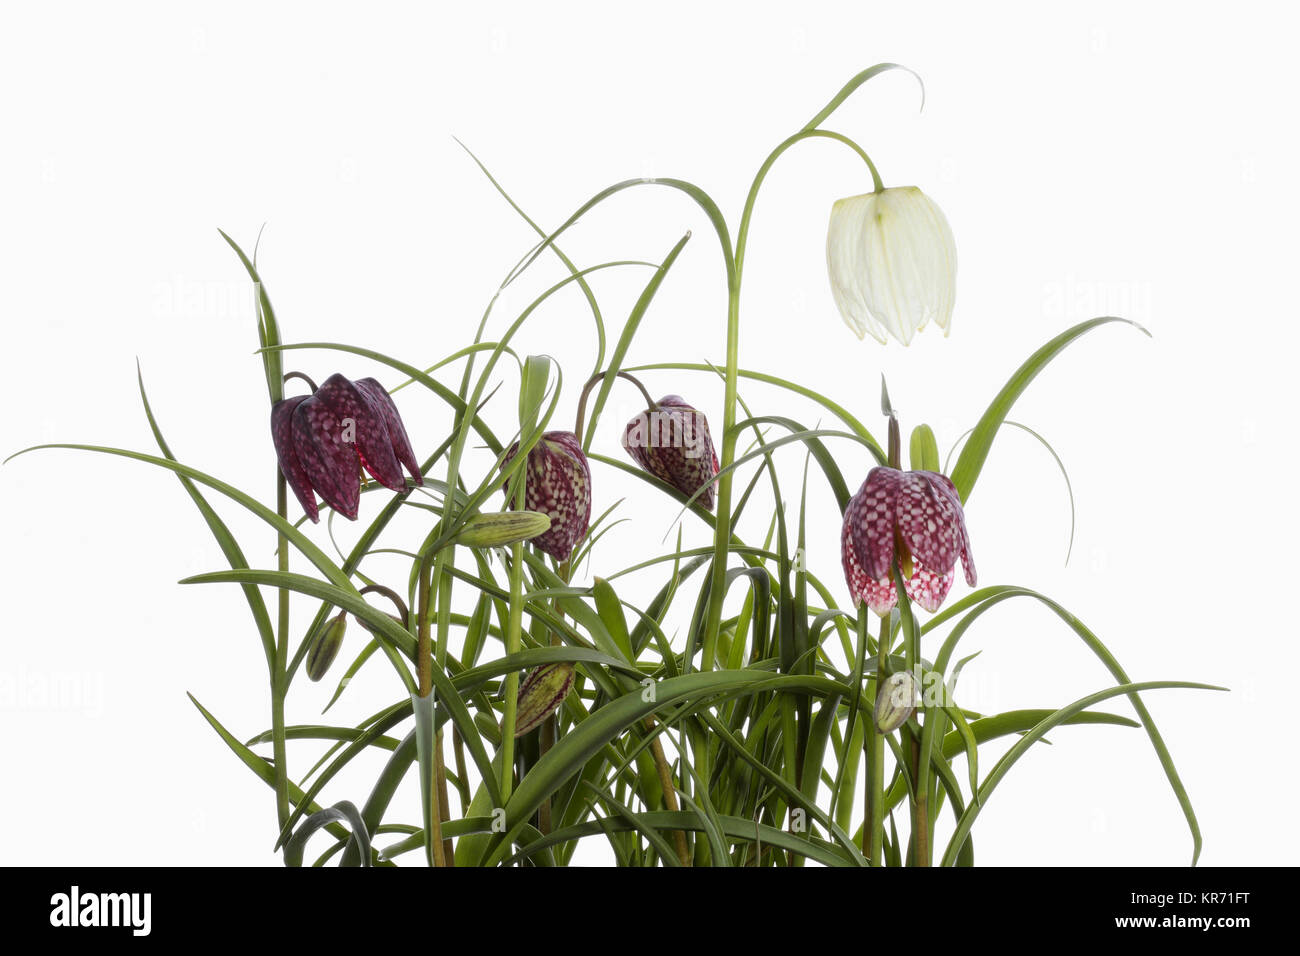 Snakes Head Fritillary, Fritillaria meleagris,  Purple and white flowers on stems growing in foliage, shown against a pure white background. Stock Photo